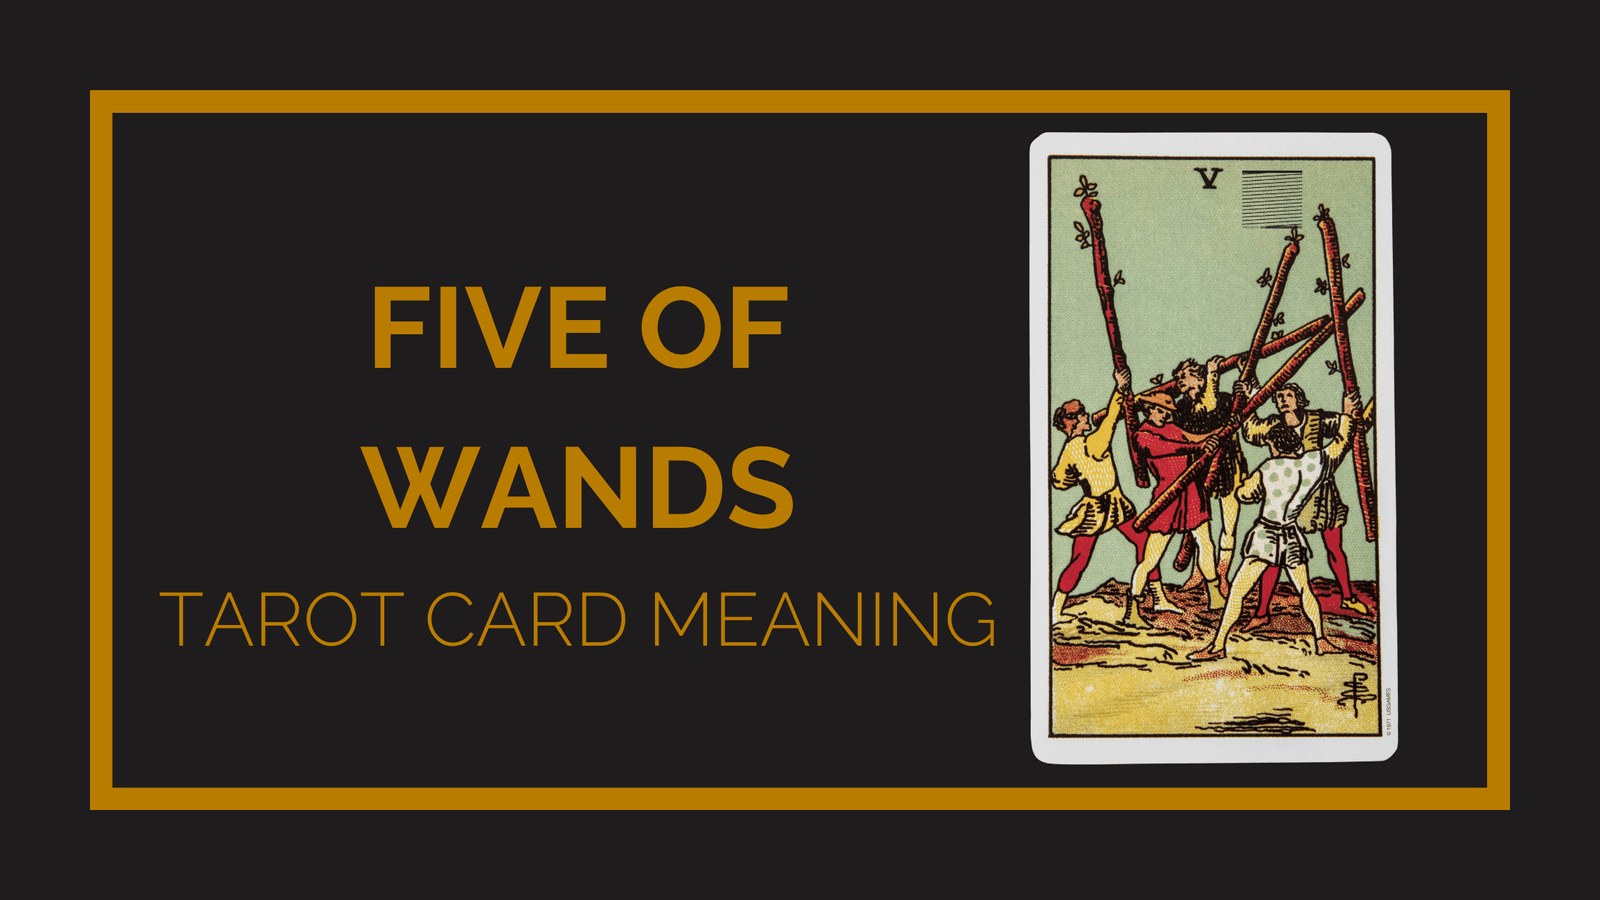 Five of wands tarot card meaning | tarot with gord